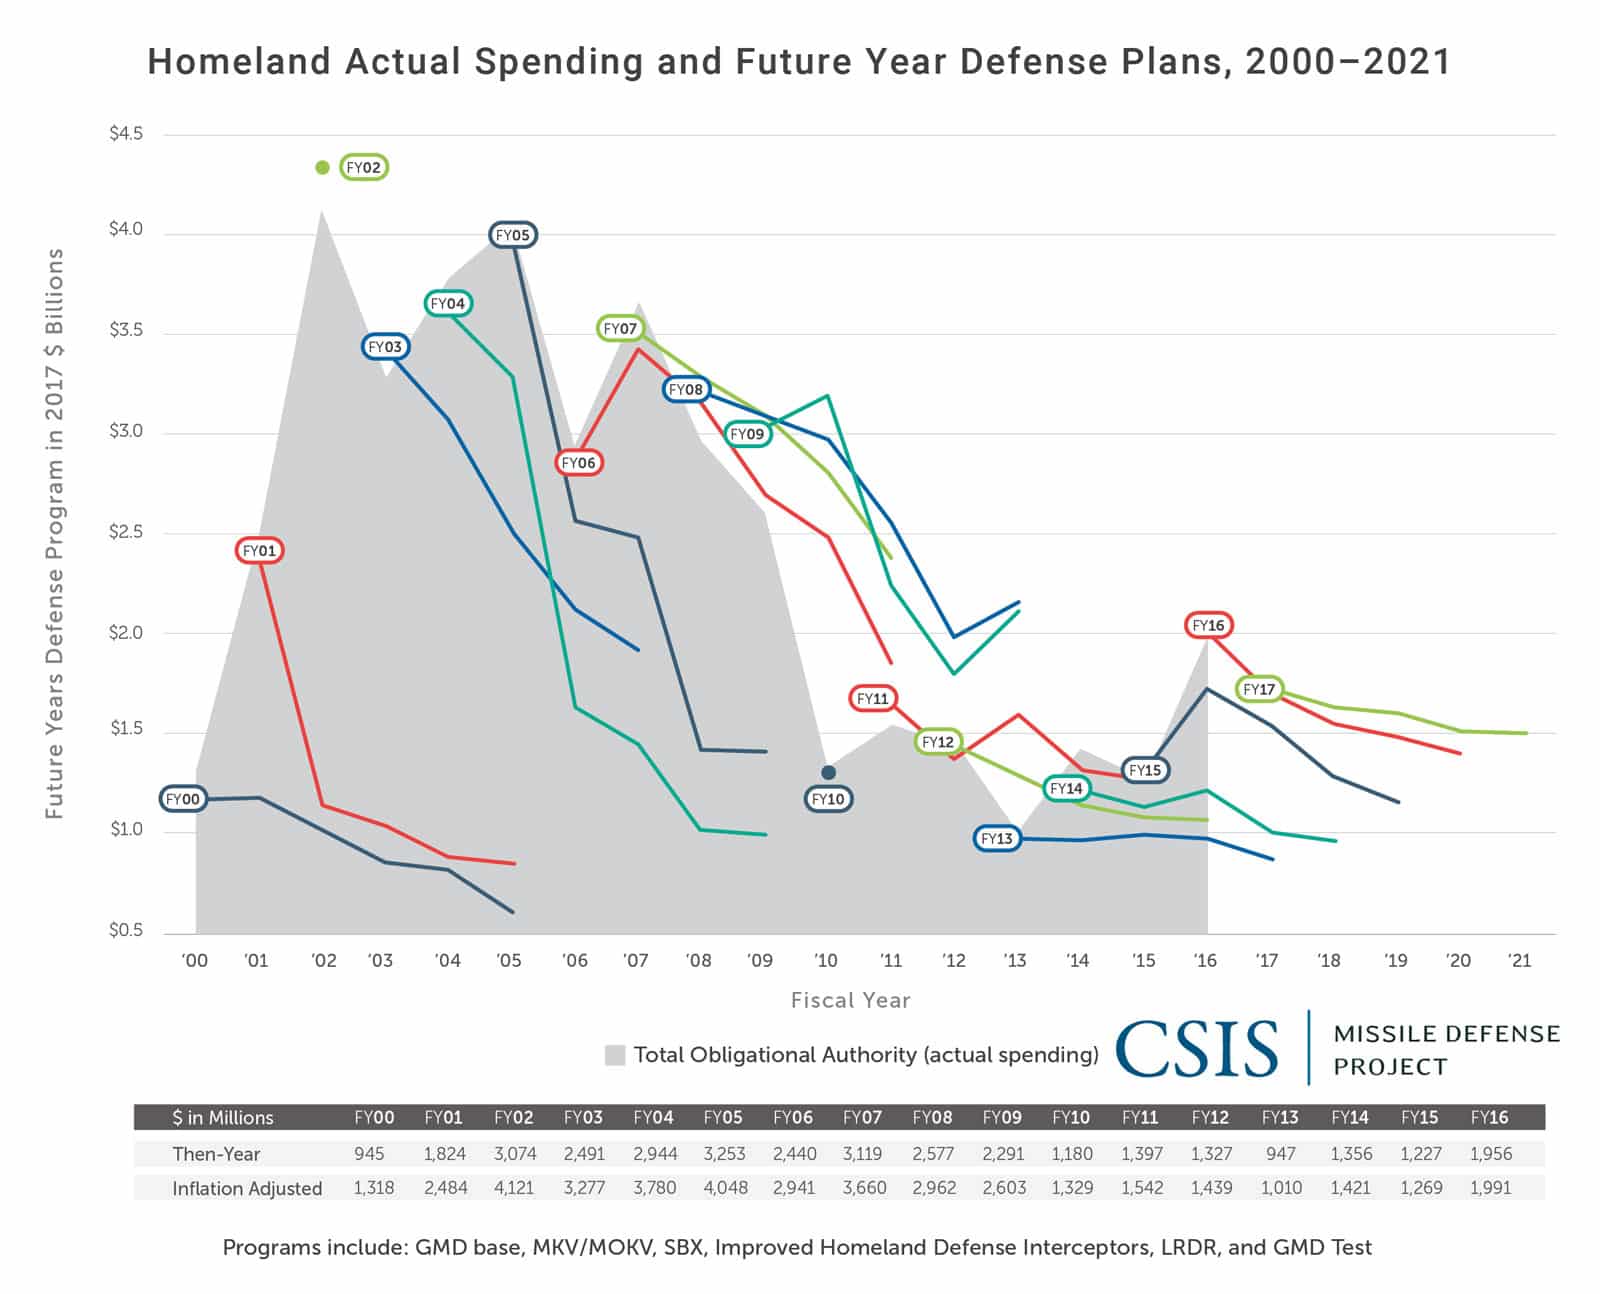 Homeland Actual Spending and Future Years Defense Plans, 2000-2021